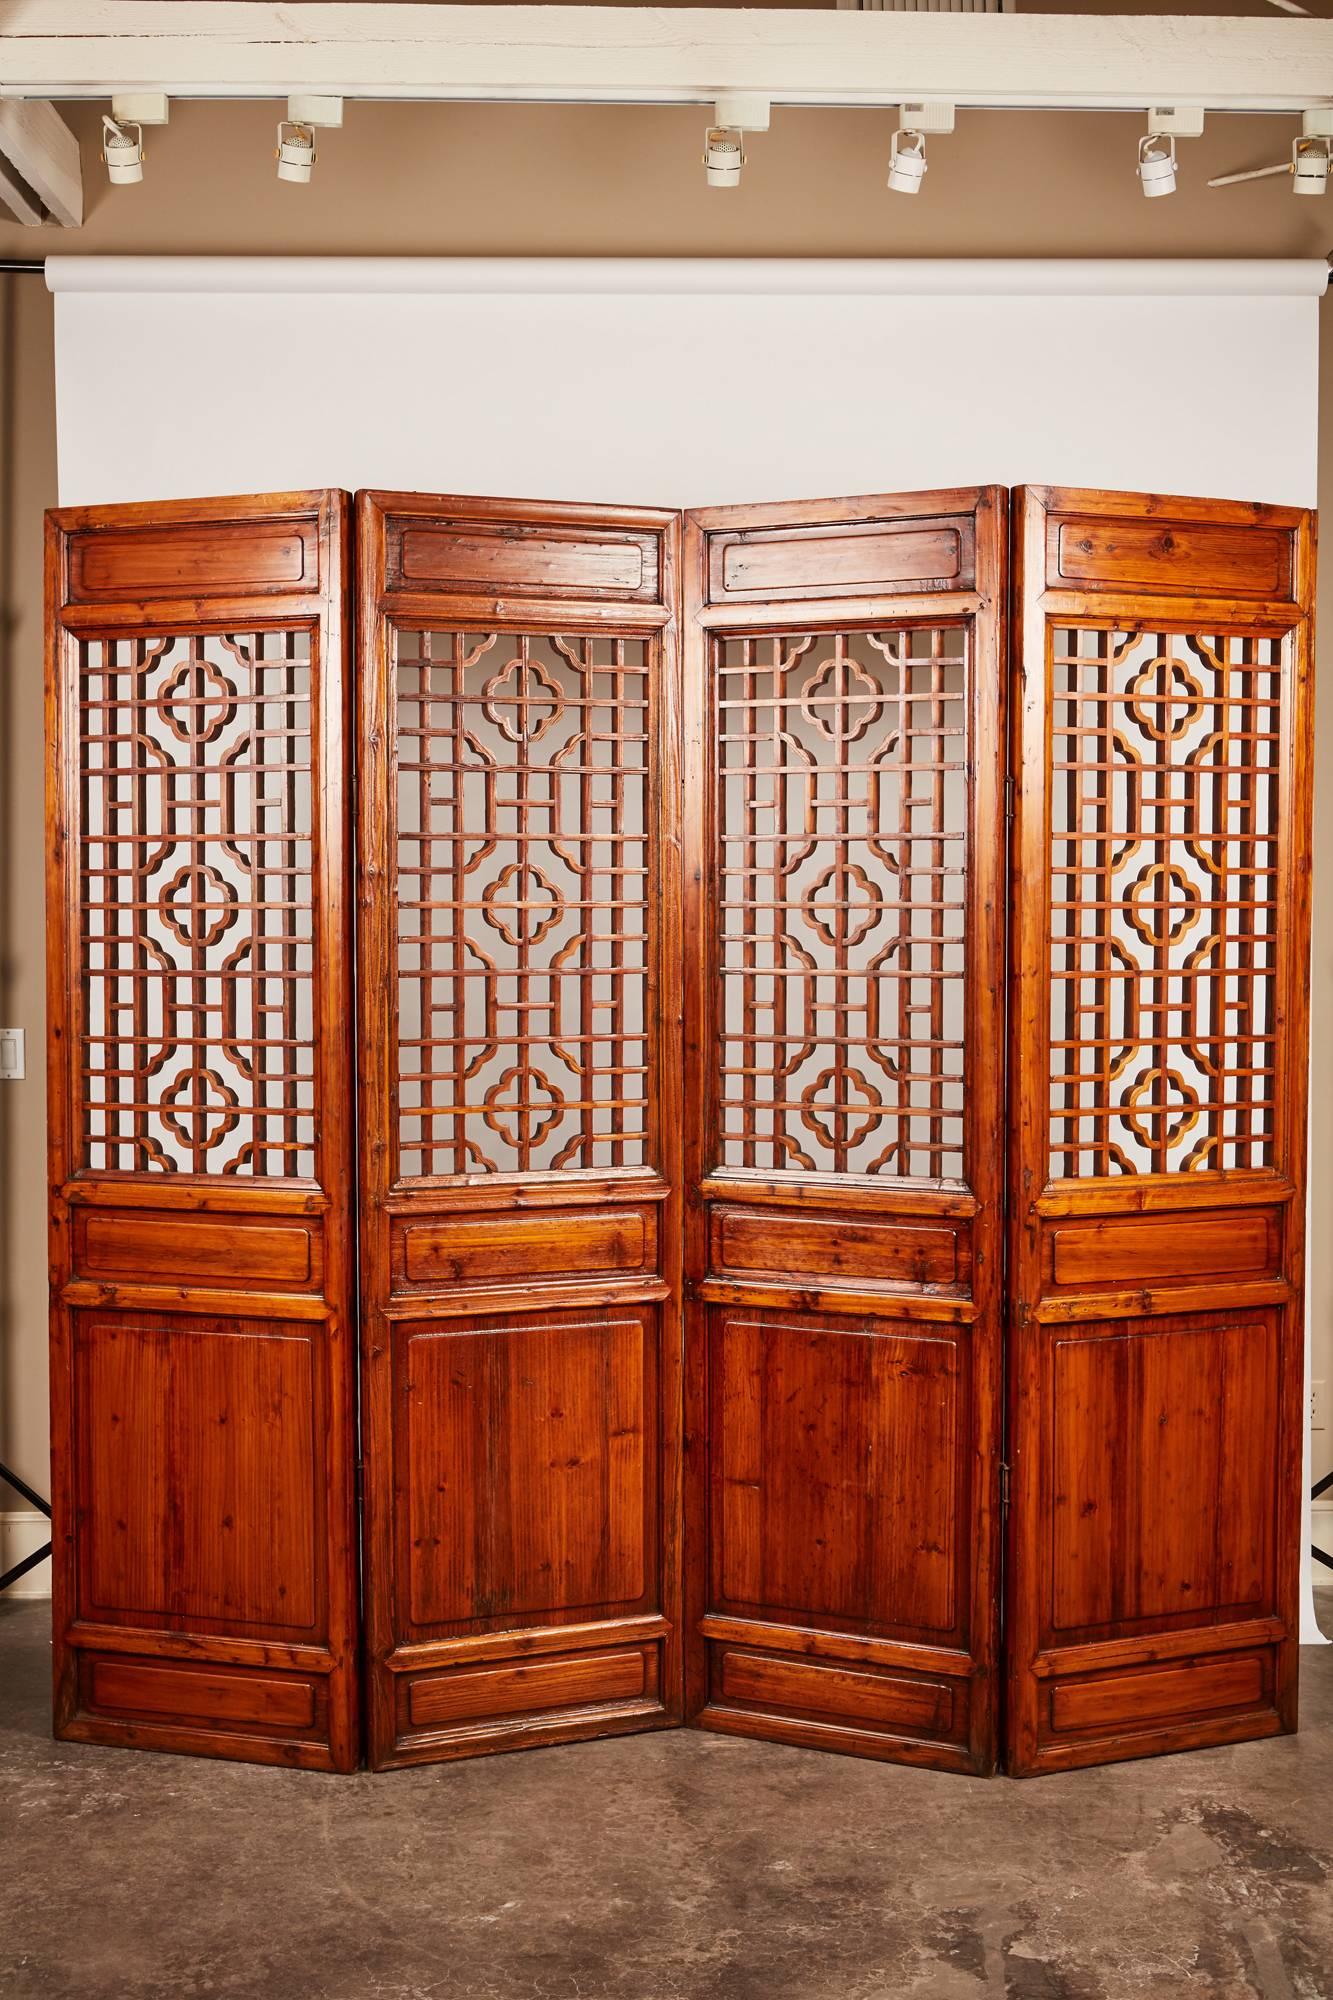 A set of 12 brown double-sided late 19th century carved Chinese screens that feature an upper portion of intricate geometrical patterns and a lower portion consisting of solid wood panels.